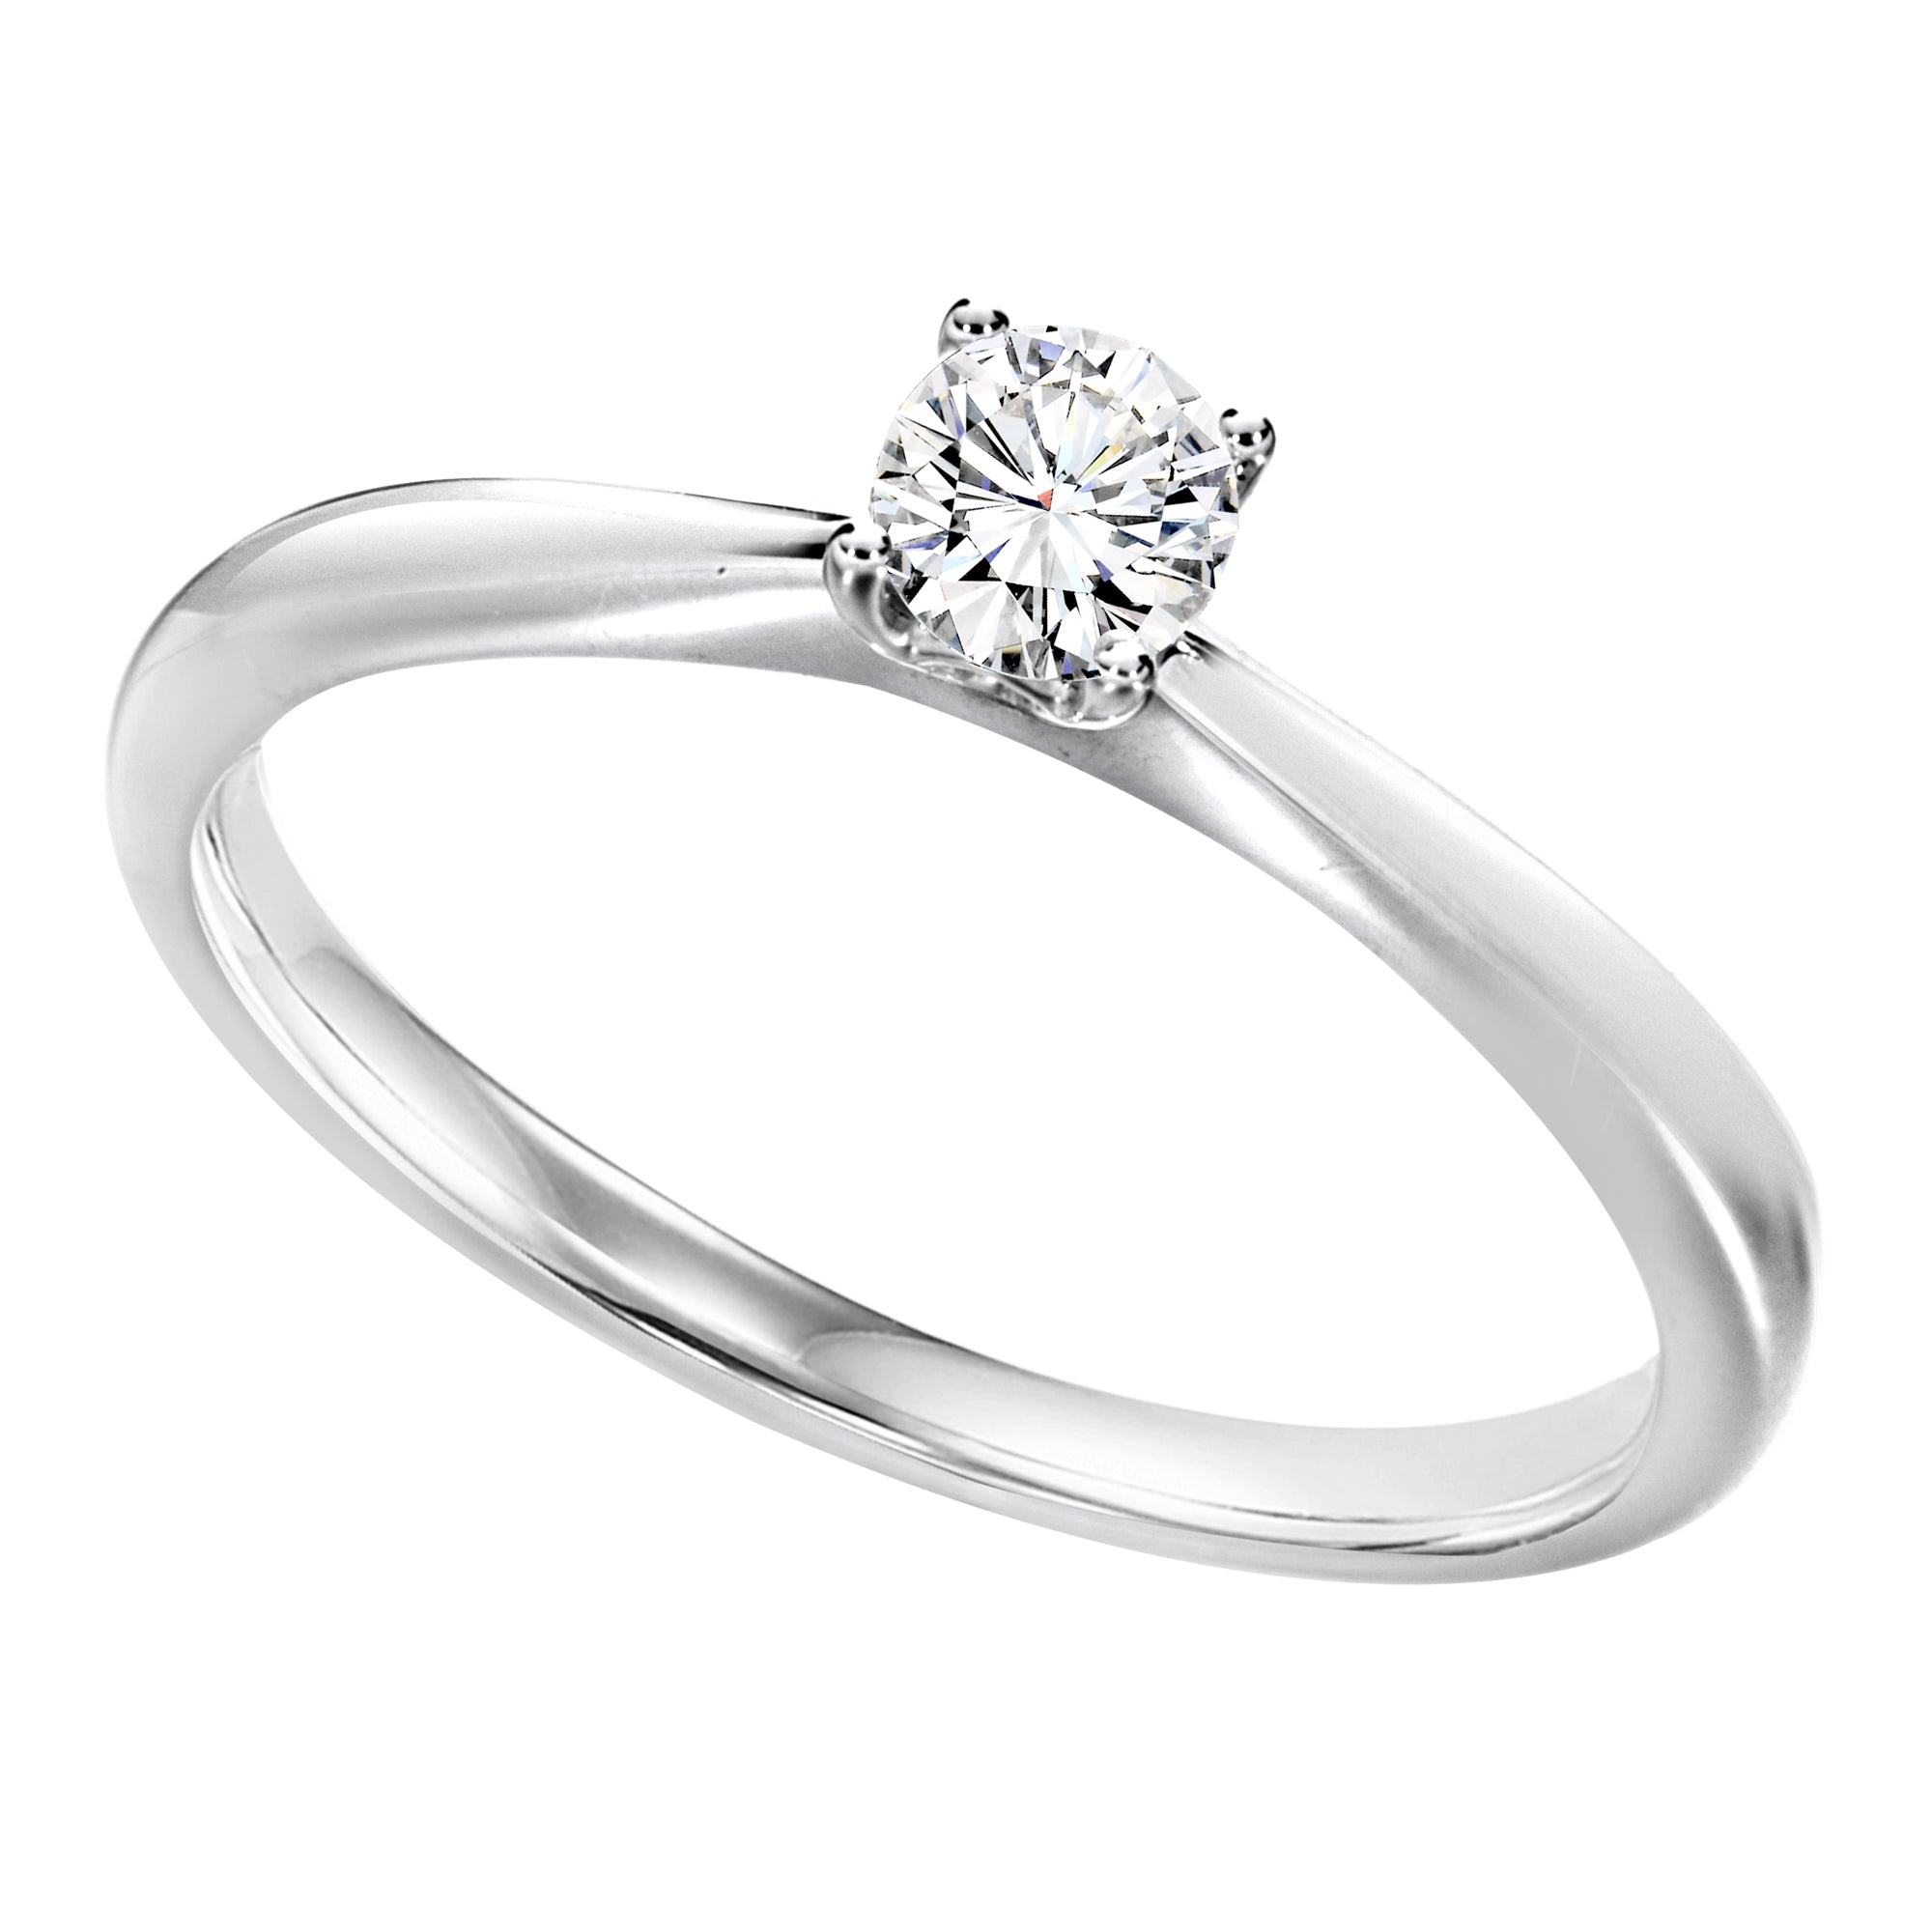 Sterling Silver Cubic Zirconia 0.33ct Ring - AK1005 - Hallmark Jewellers Formby & The Jewellers Bench Widnes